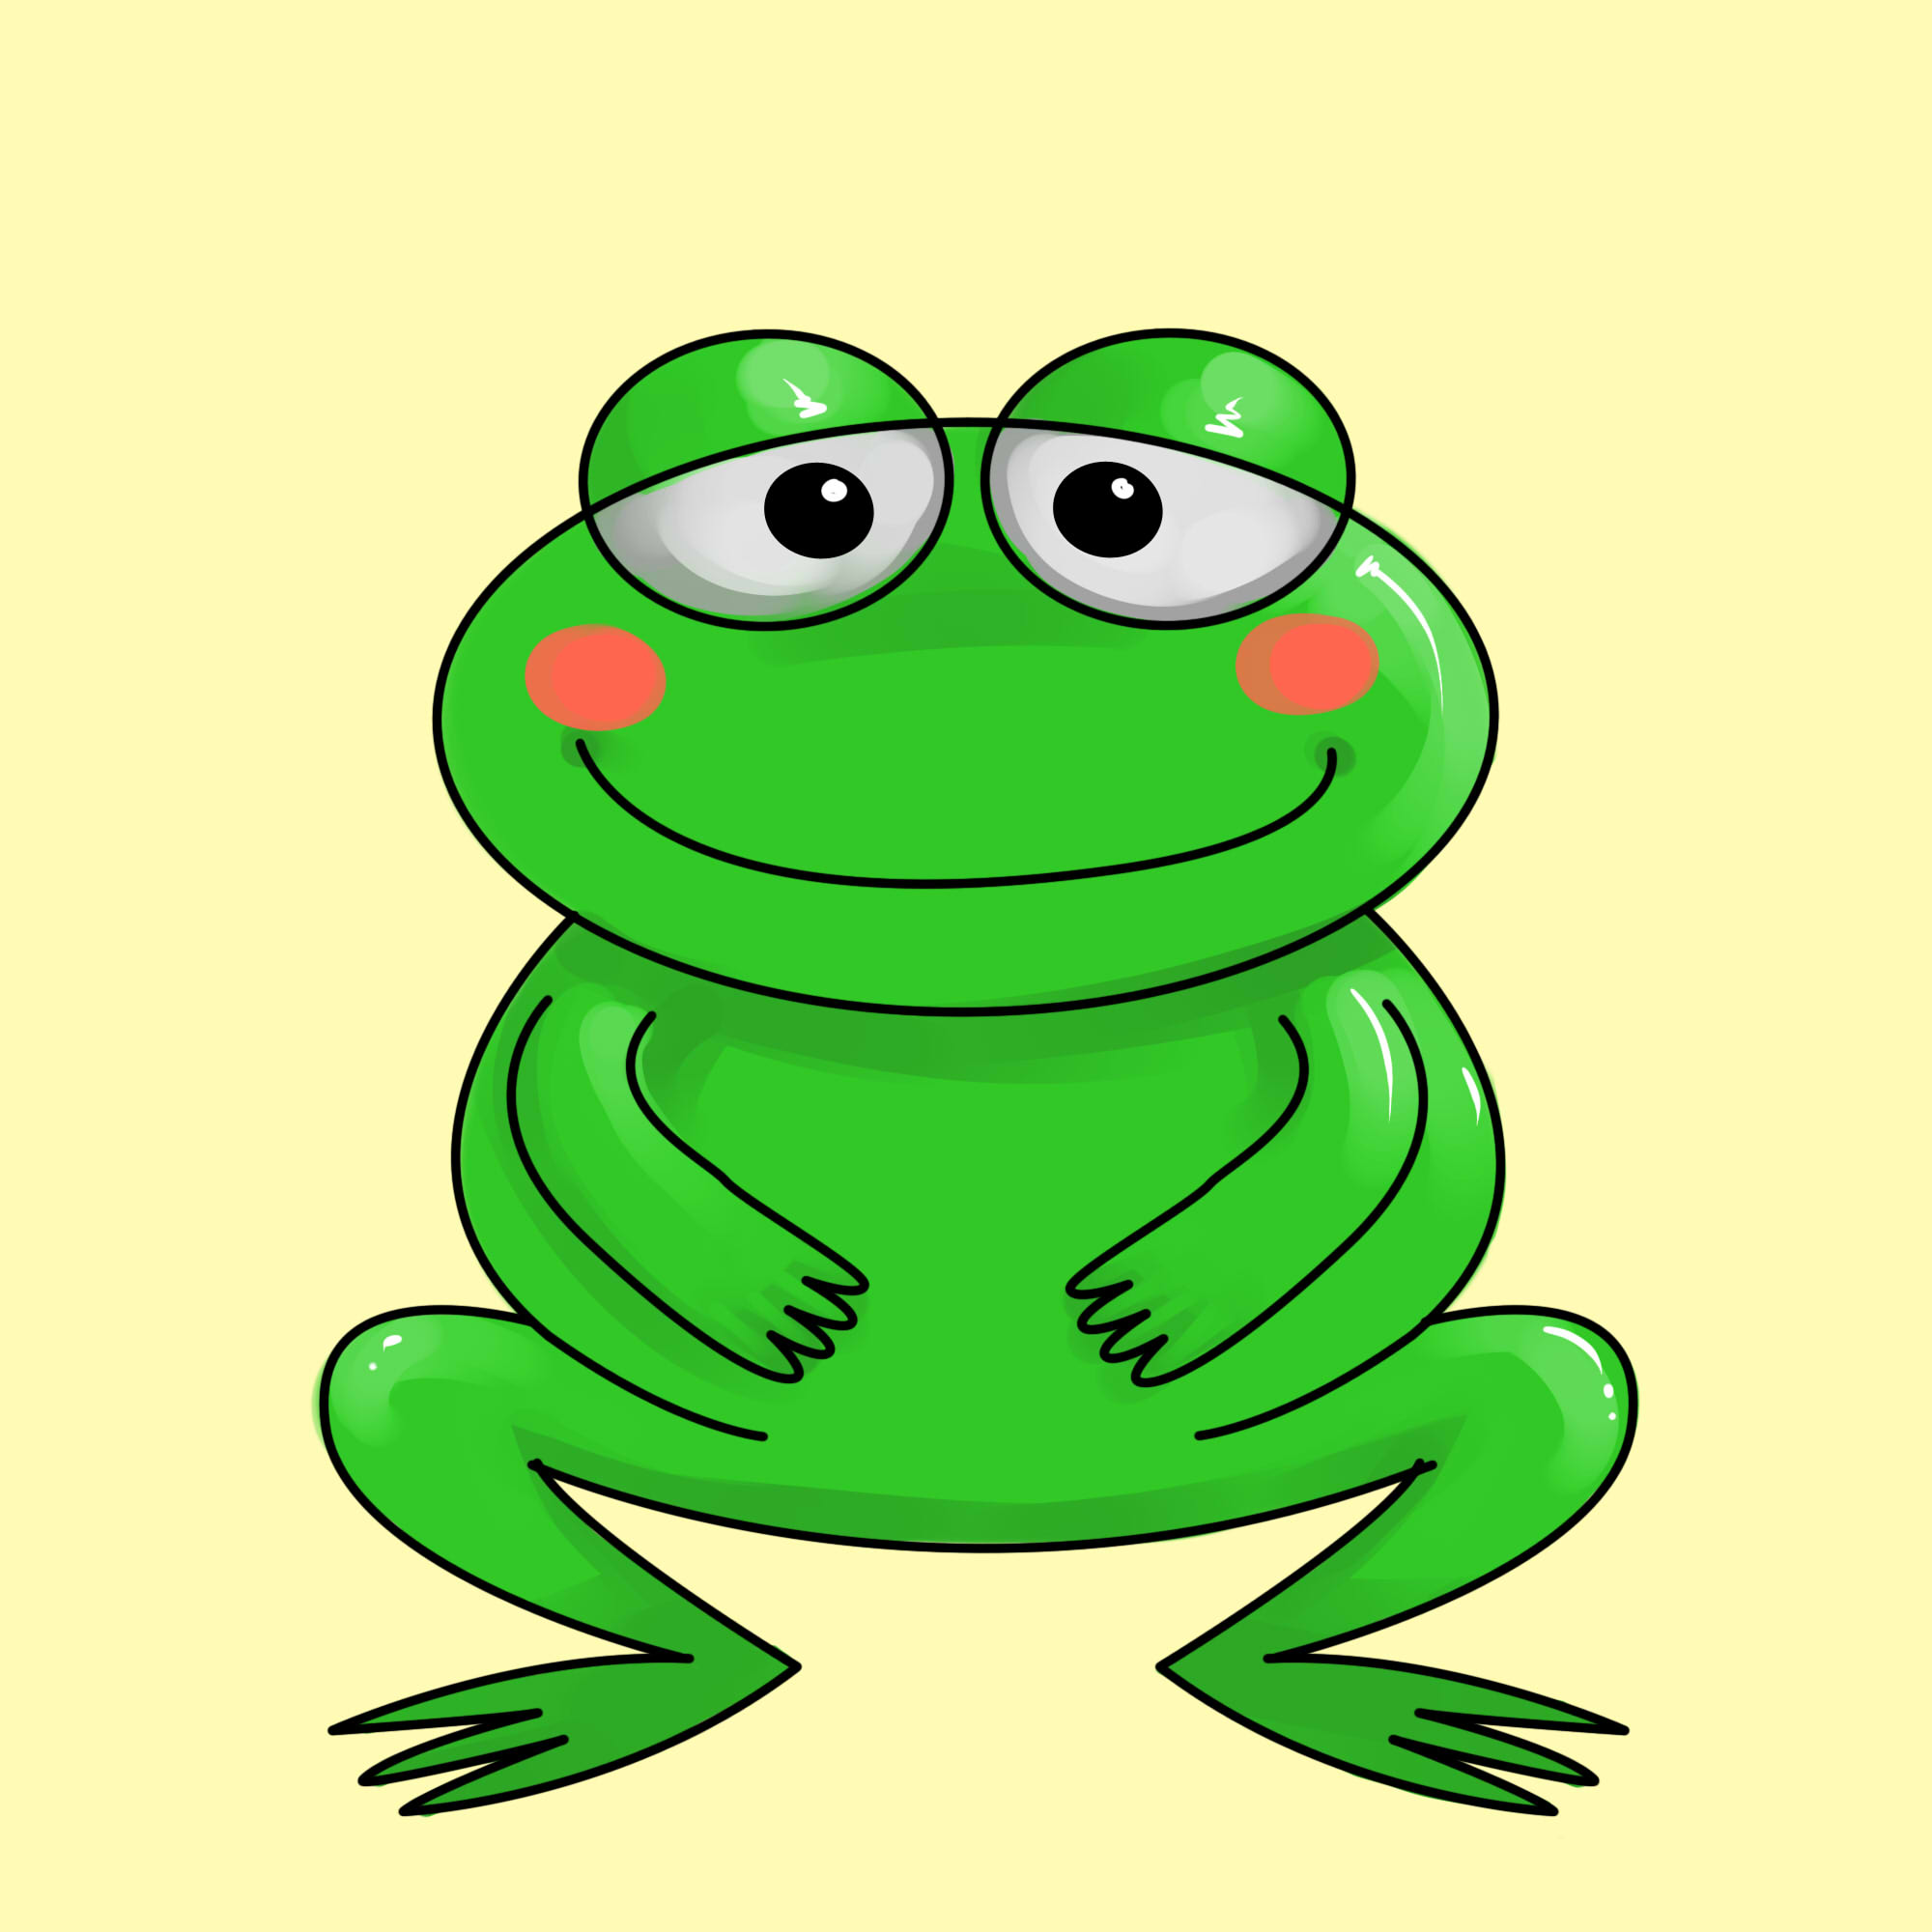  photos Frog Cartoon Pictures Images Pics Photos Wallpapers Pictures